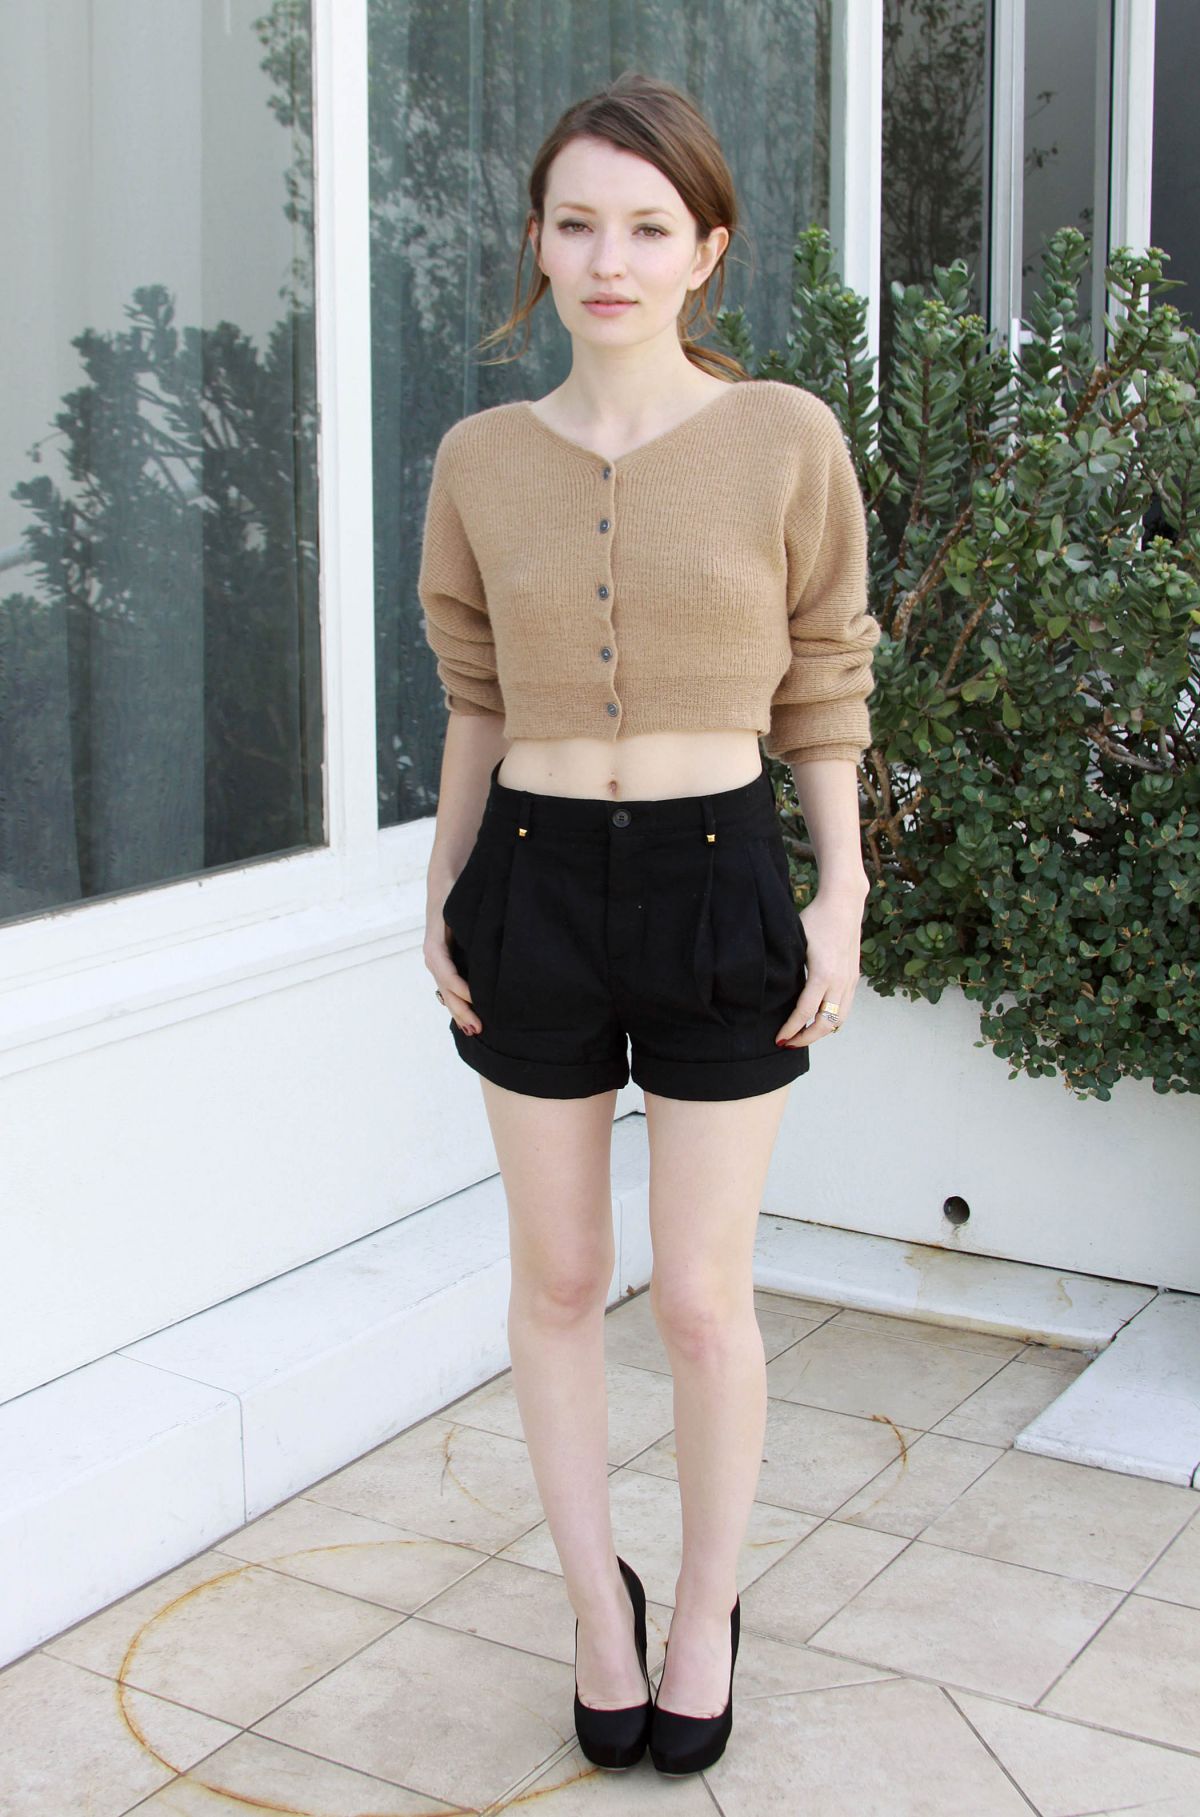 Pin By Cazza17 On Celebrities Photoshoot Emily Browning Clothes